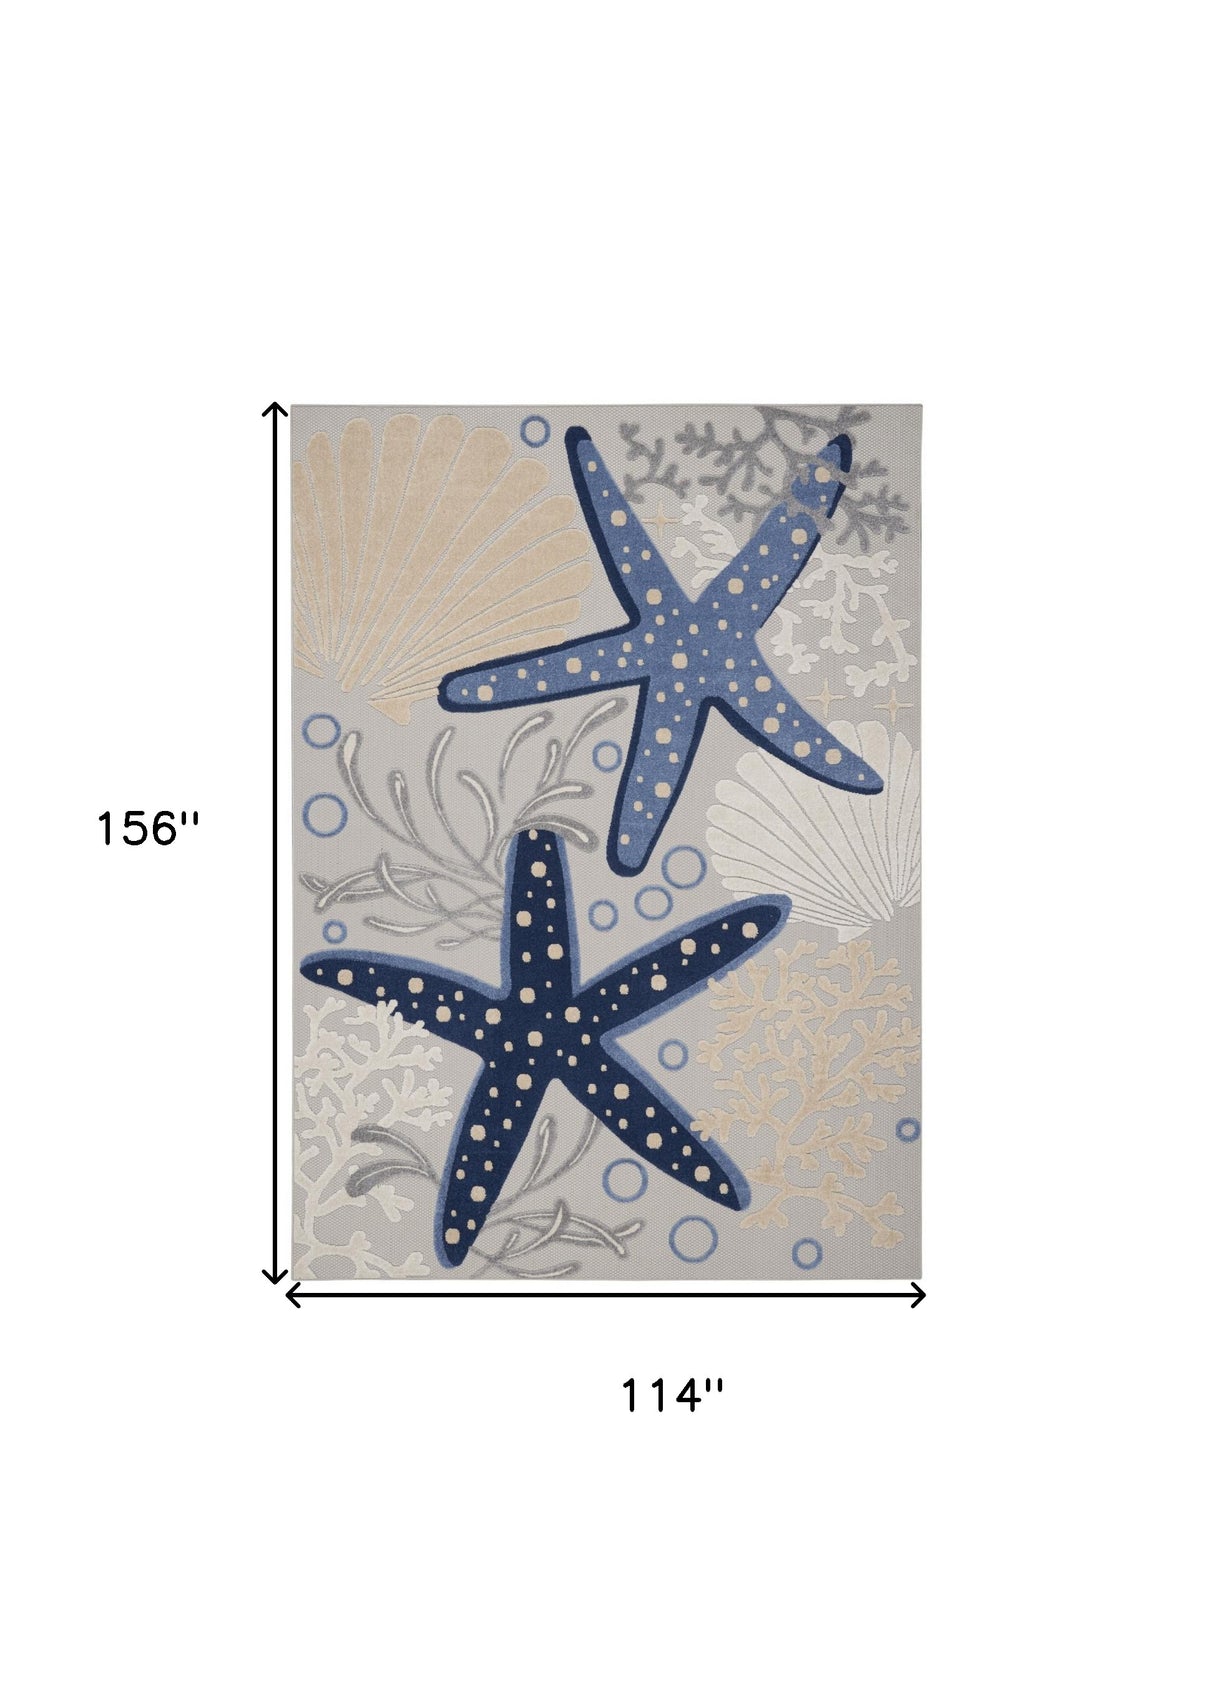 10' x 13' Blue and Gray Starfish Indoor Outdoor Area Rug